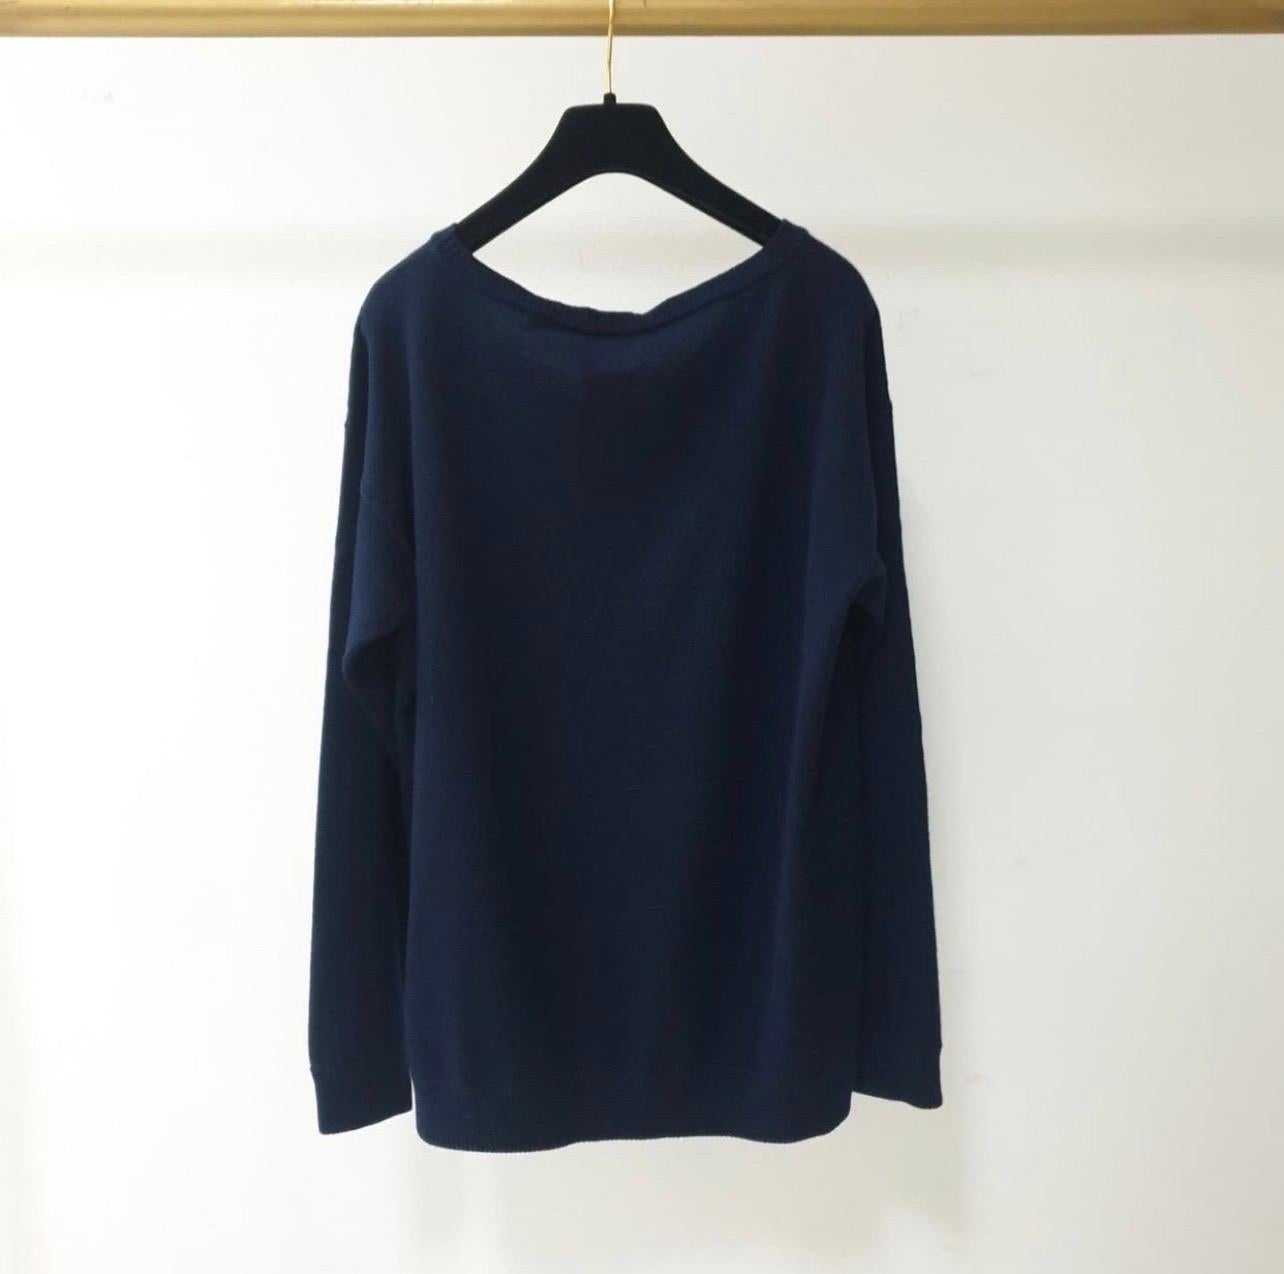 Sweater LIMITED EDITION 100% cashmere navy blue, white lion's head motif is embroidered on the front.
Sz.36
Very good condition.